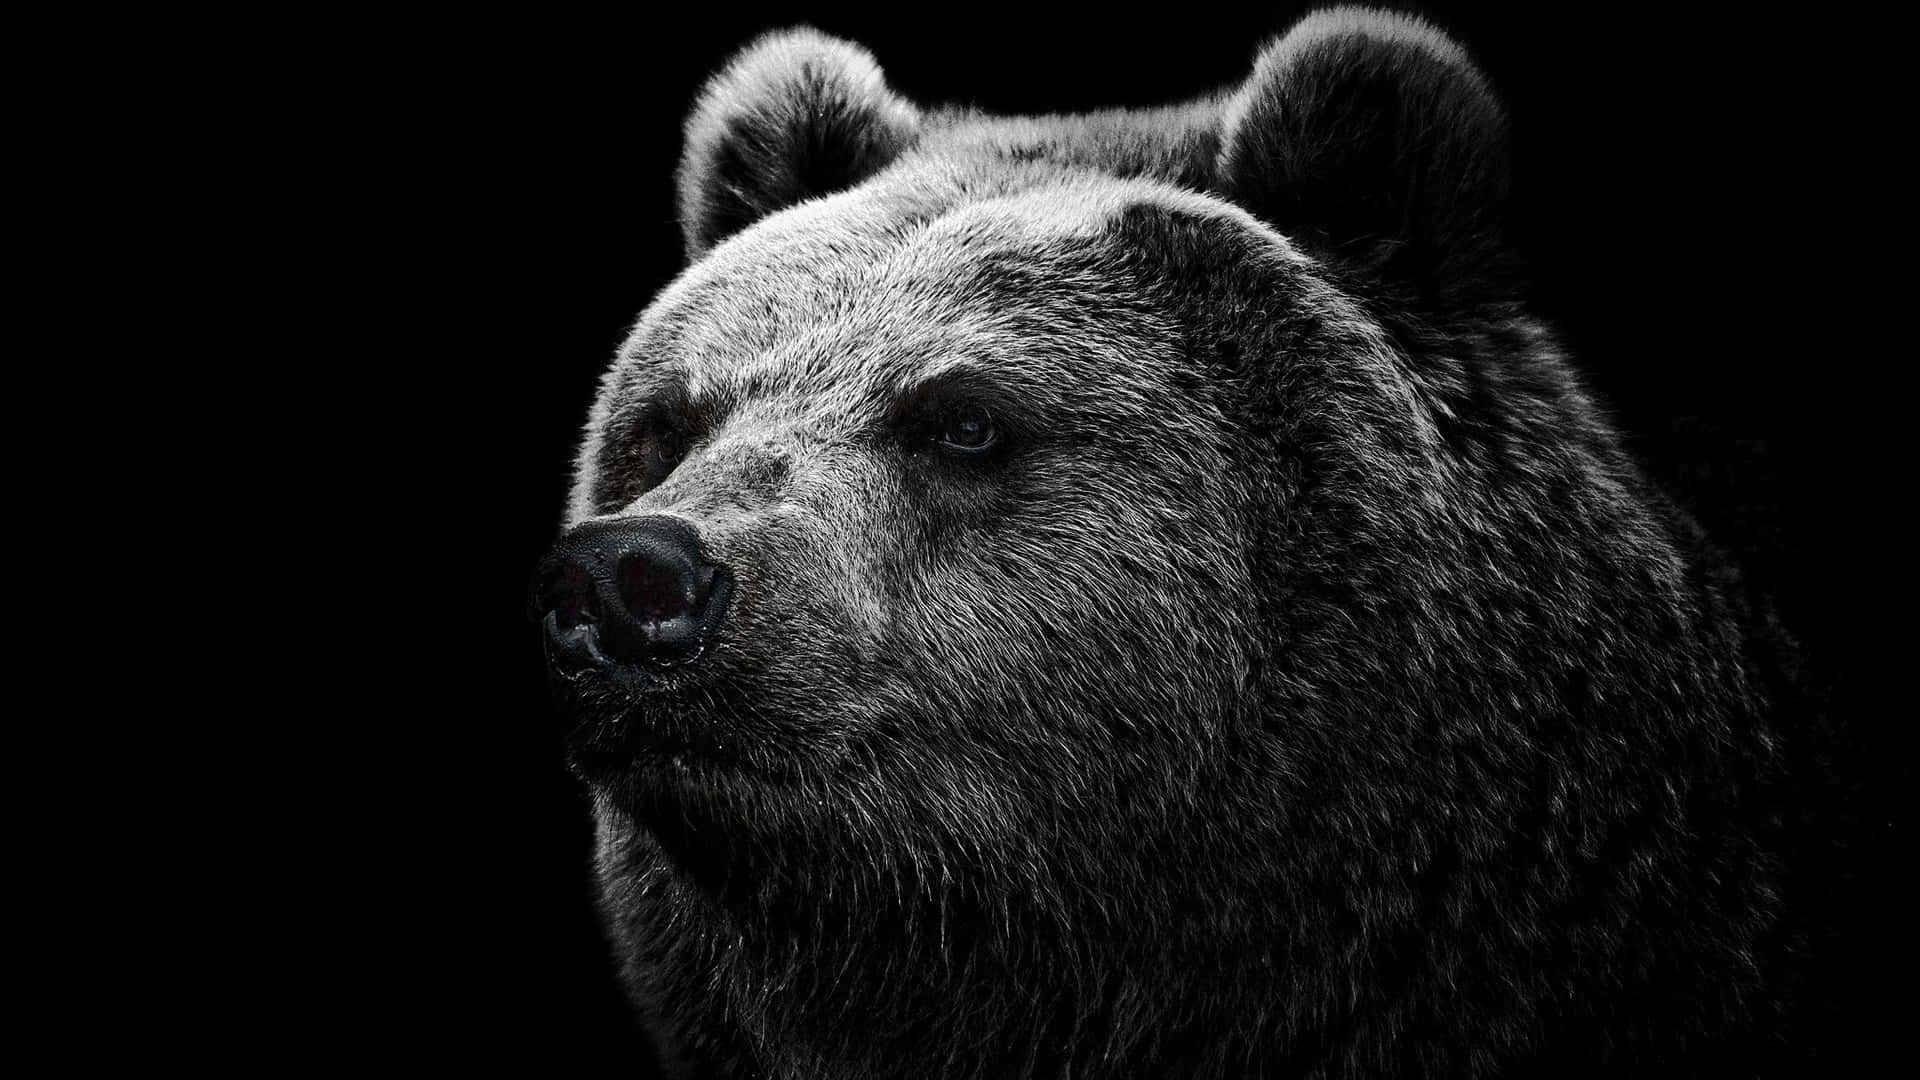 A Black And White Photo Of A Bear Wallpaper